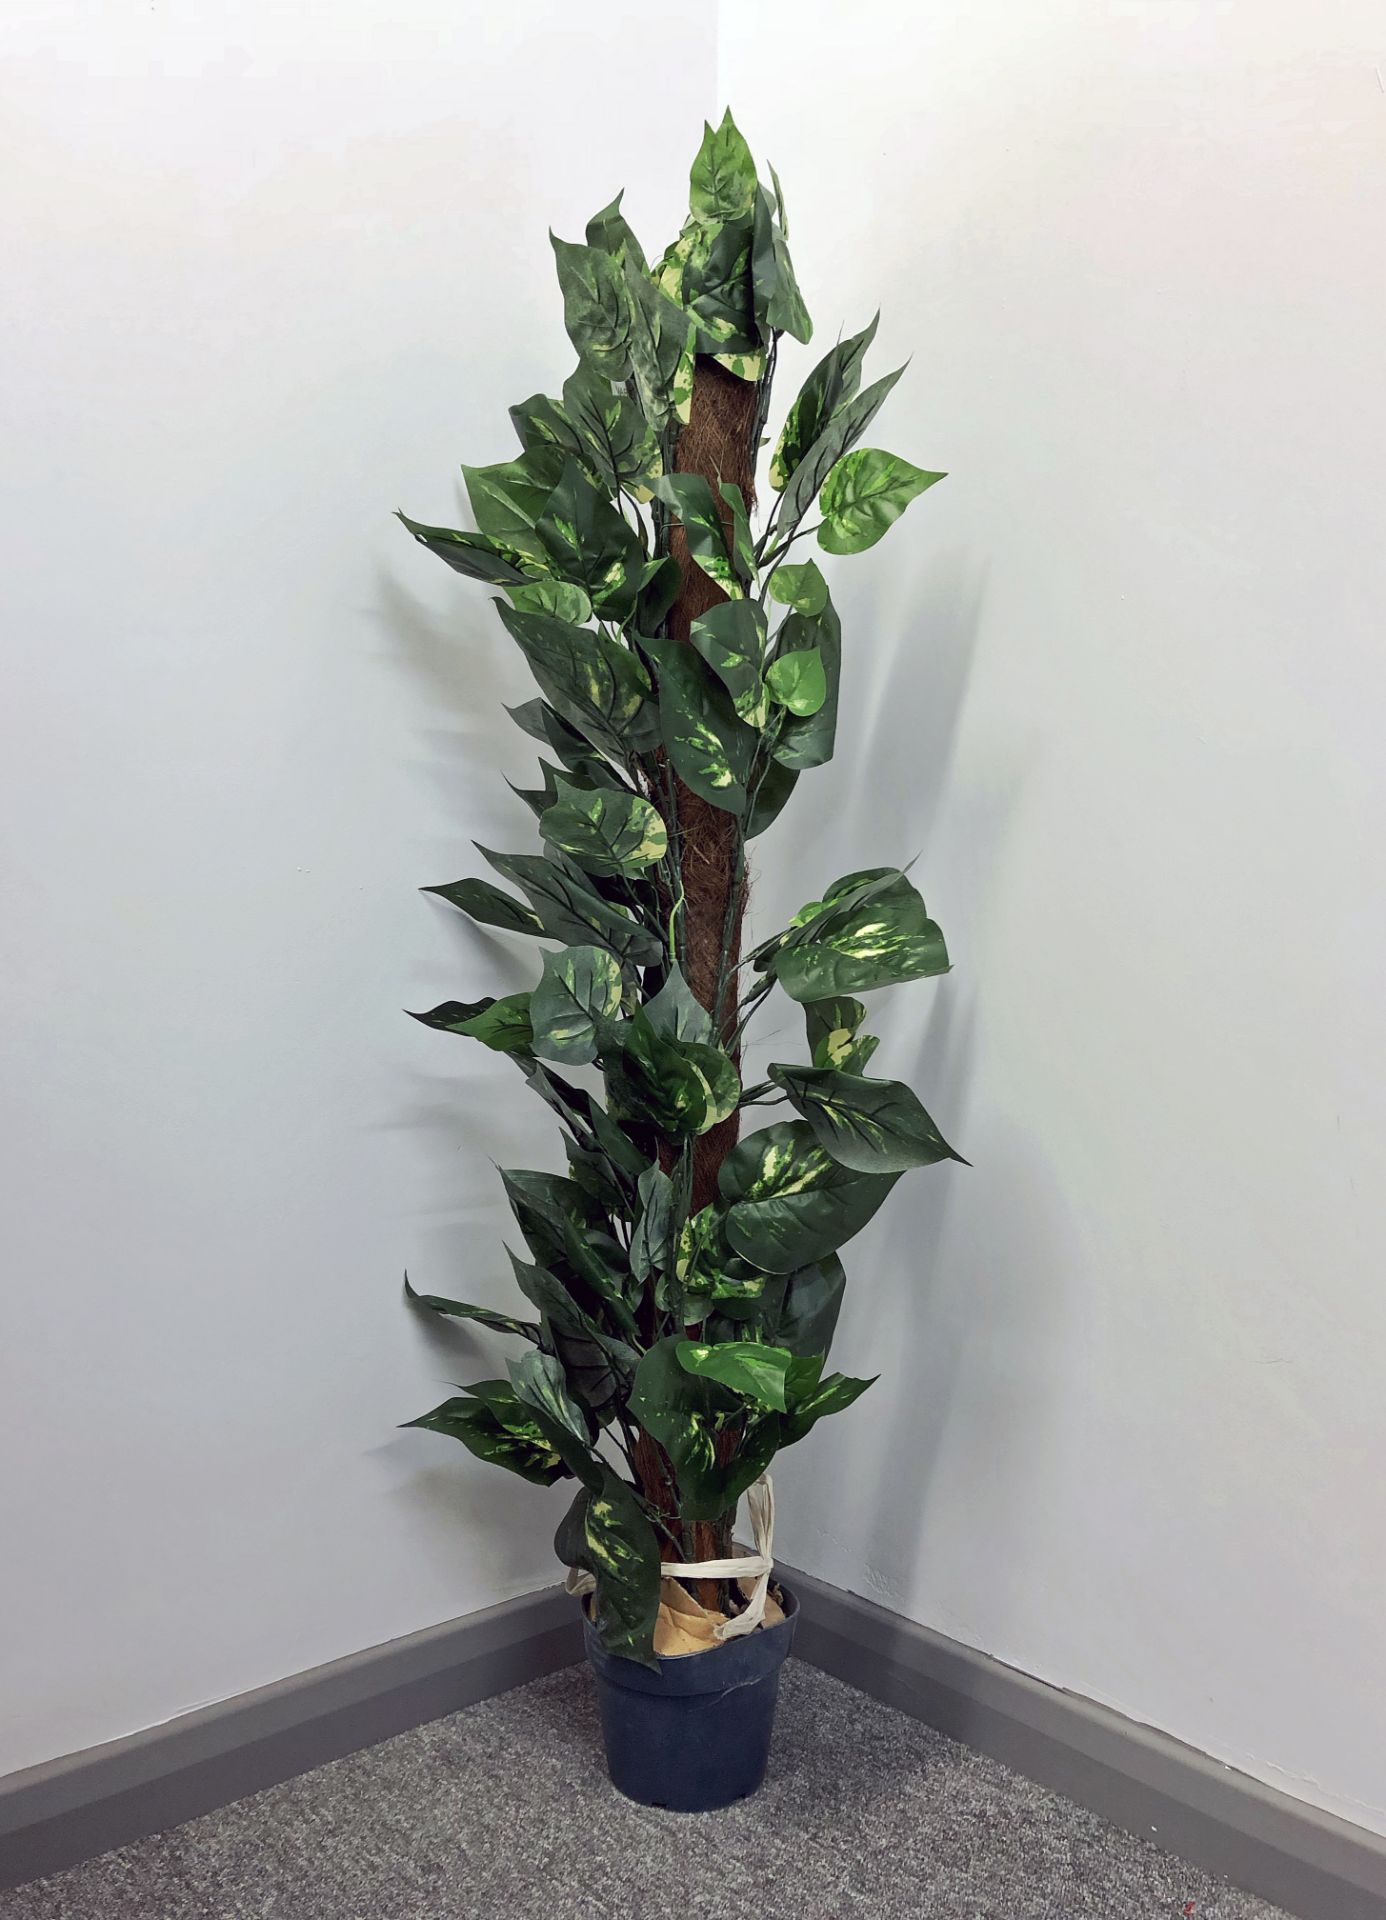 V Brand New Plants4Life 3.5ft (107cm) Variegated Climbing Plant - Image 2 of 2